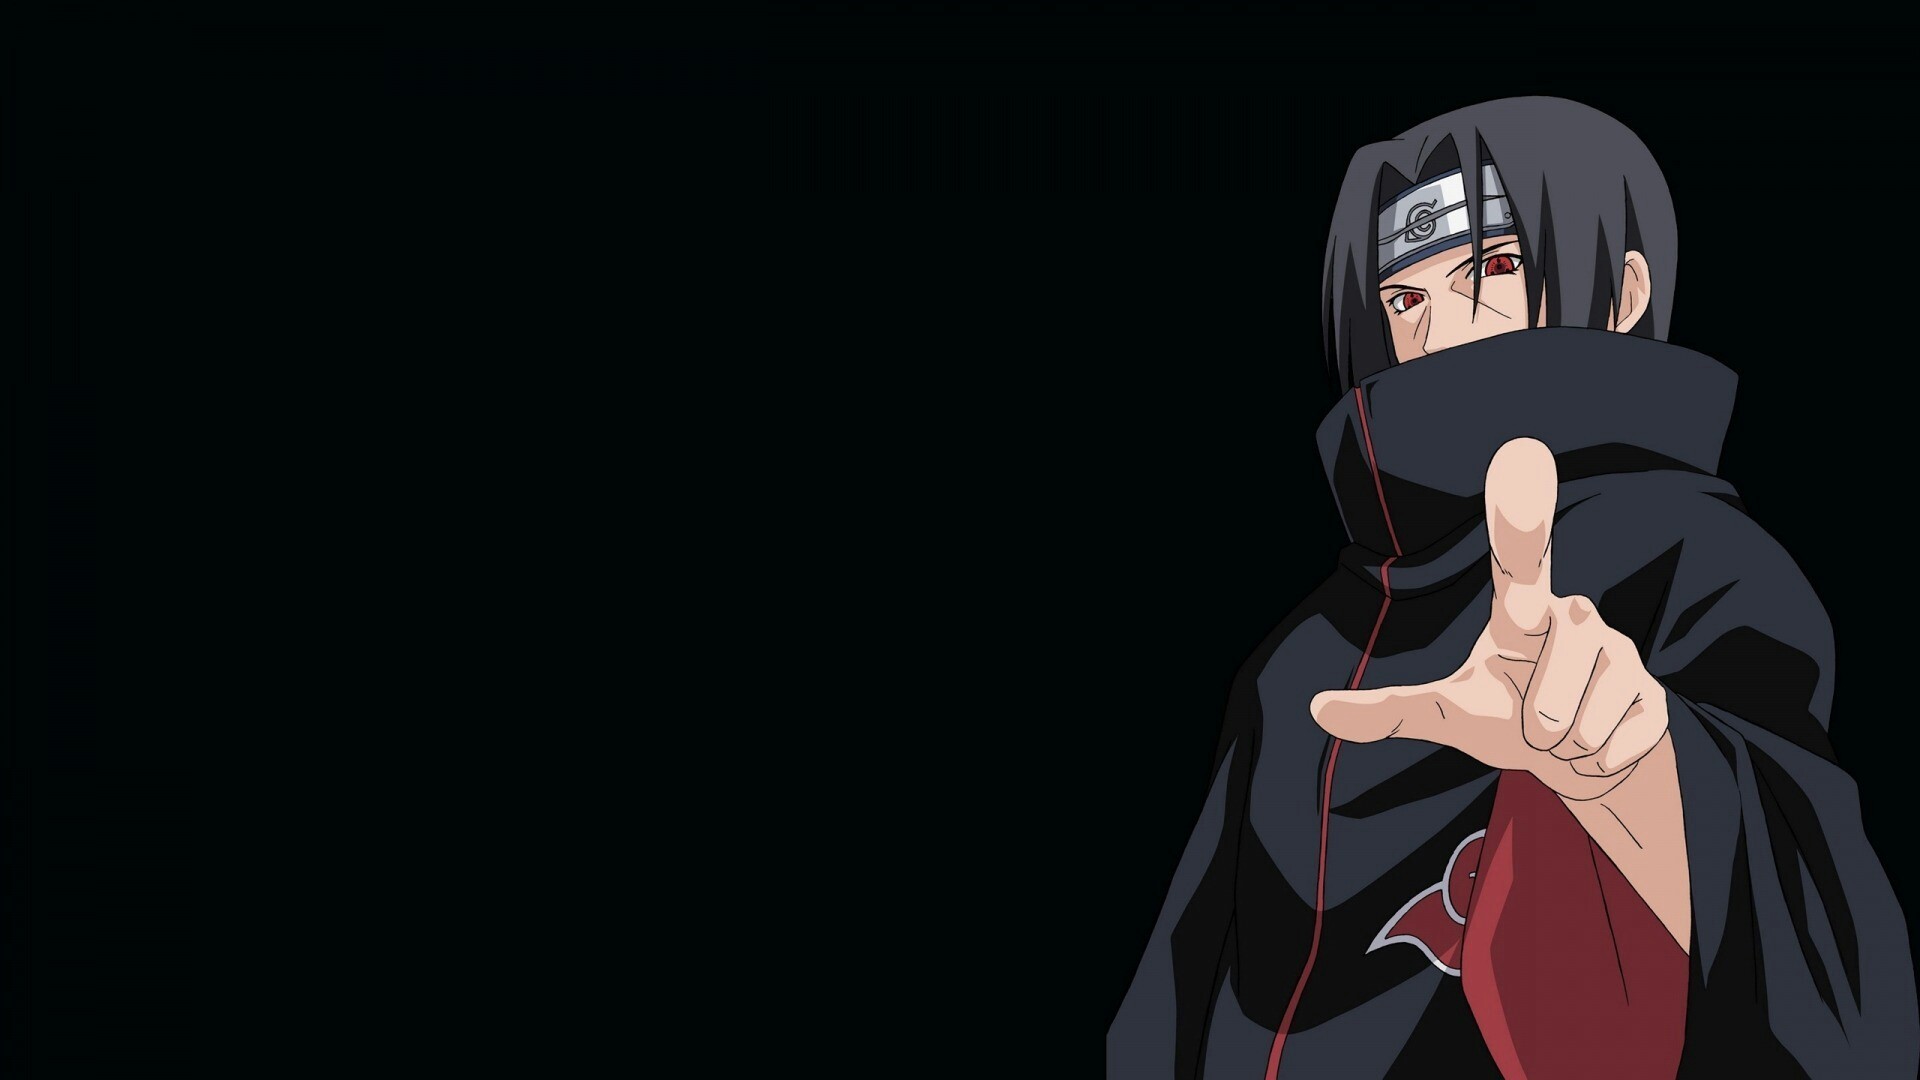 1920x1080 Search Results for “itachi uchiha wallpaper pack” – Adorable Wallpapers